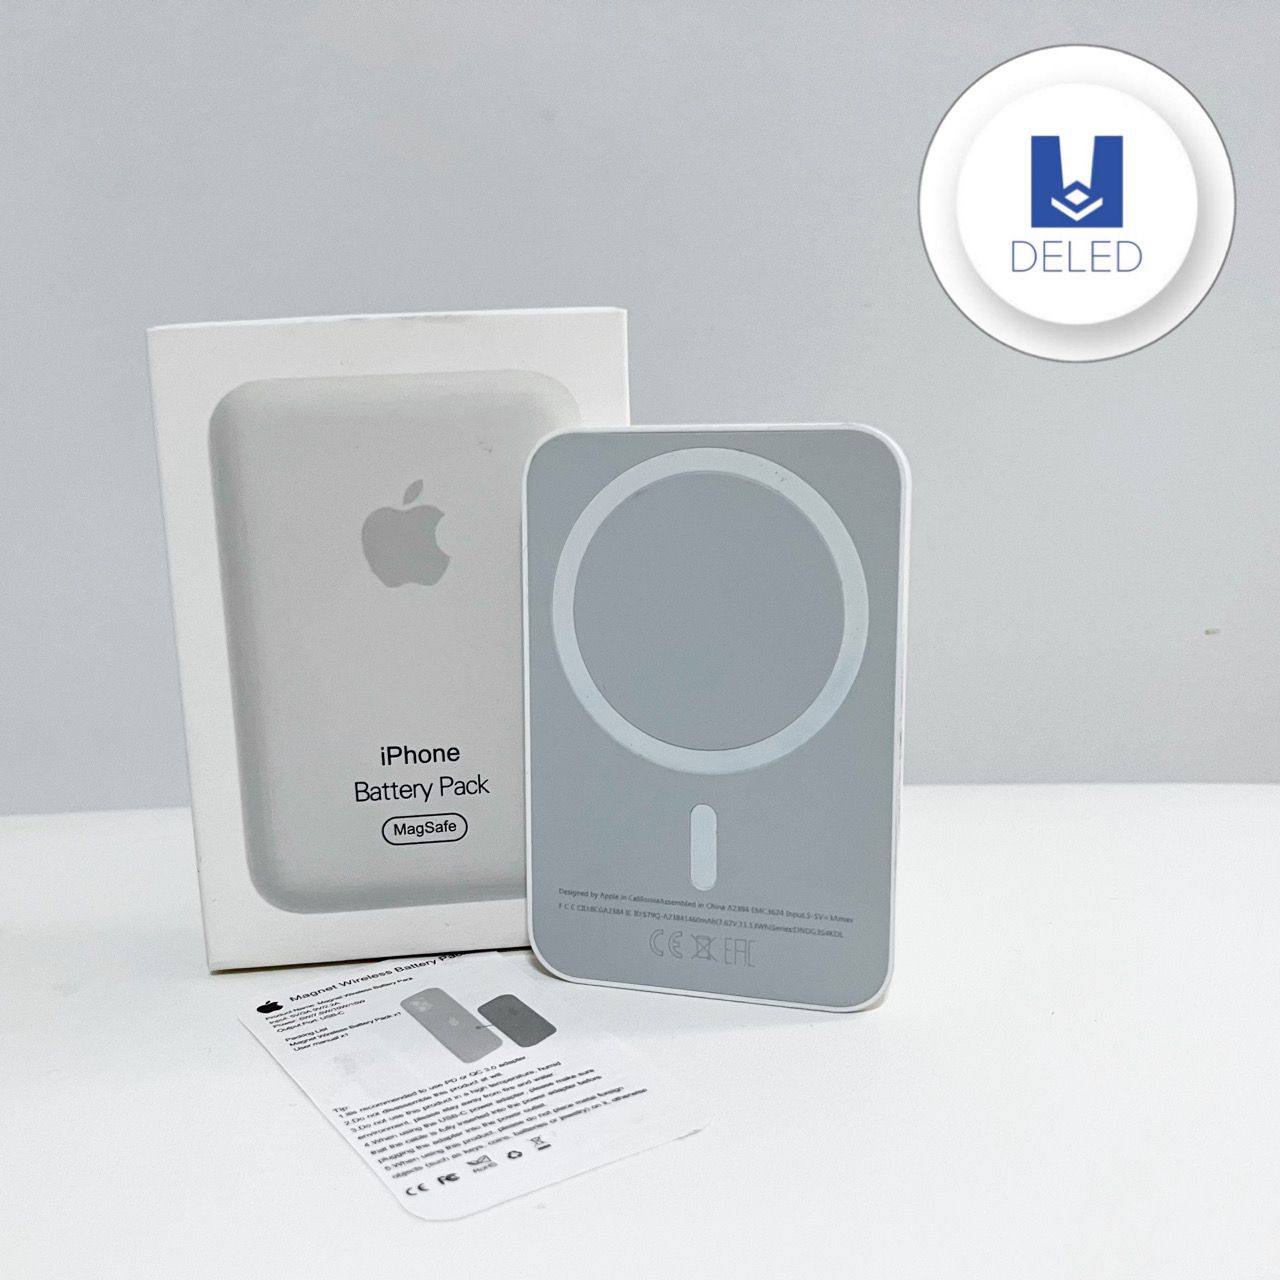 Apple Magsafe Battery Pack - Cell phones & accessories